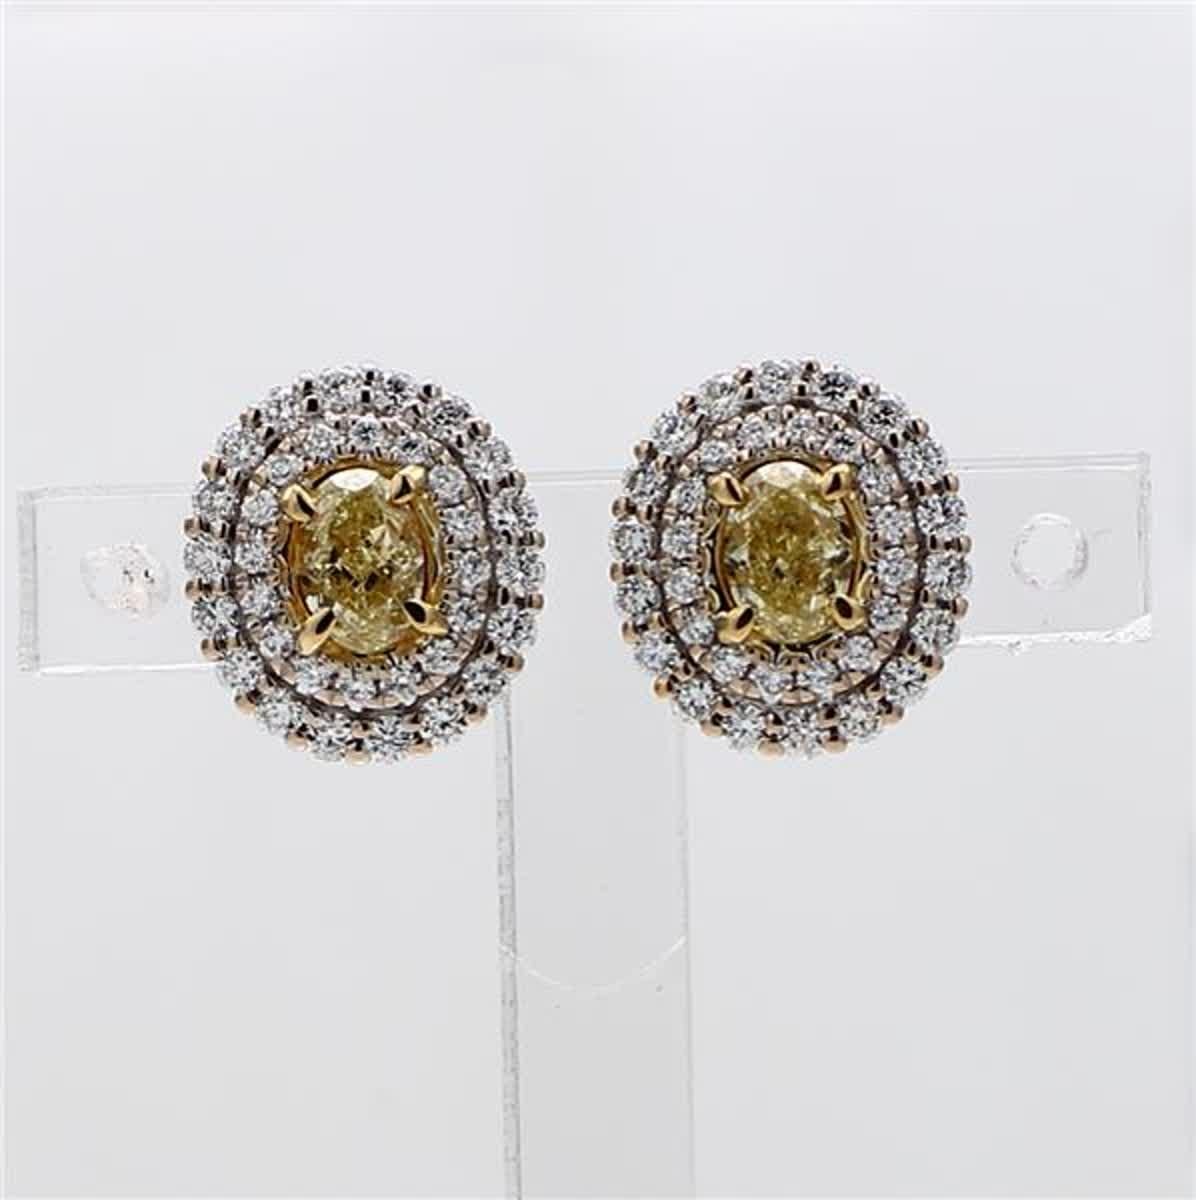 RareGemWorld's classic natural oval cut yellow diamond earrings. Mounted in a beautiful 18K Yellow and White Gold setting with natural oval cut yellow diamonds. The yellow diamonds are surrounded by a double halo of small round natural white diamond